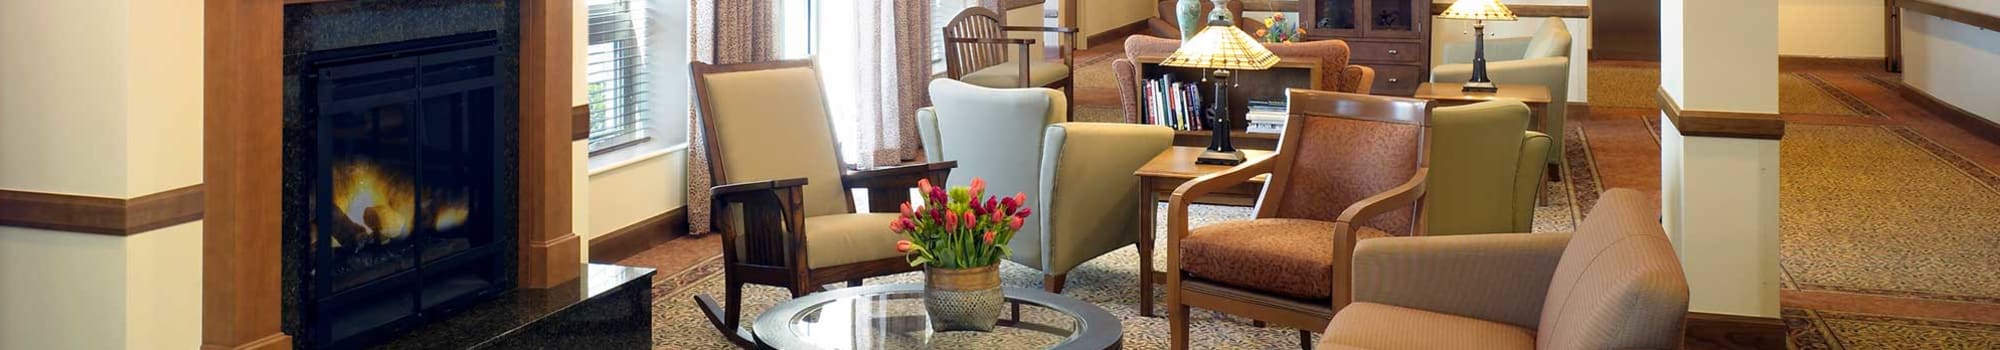 Assisted living in Vernon Hills, IL